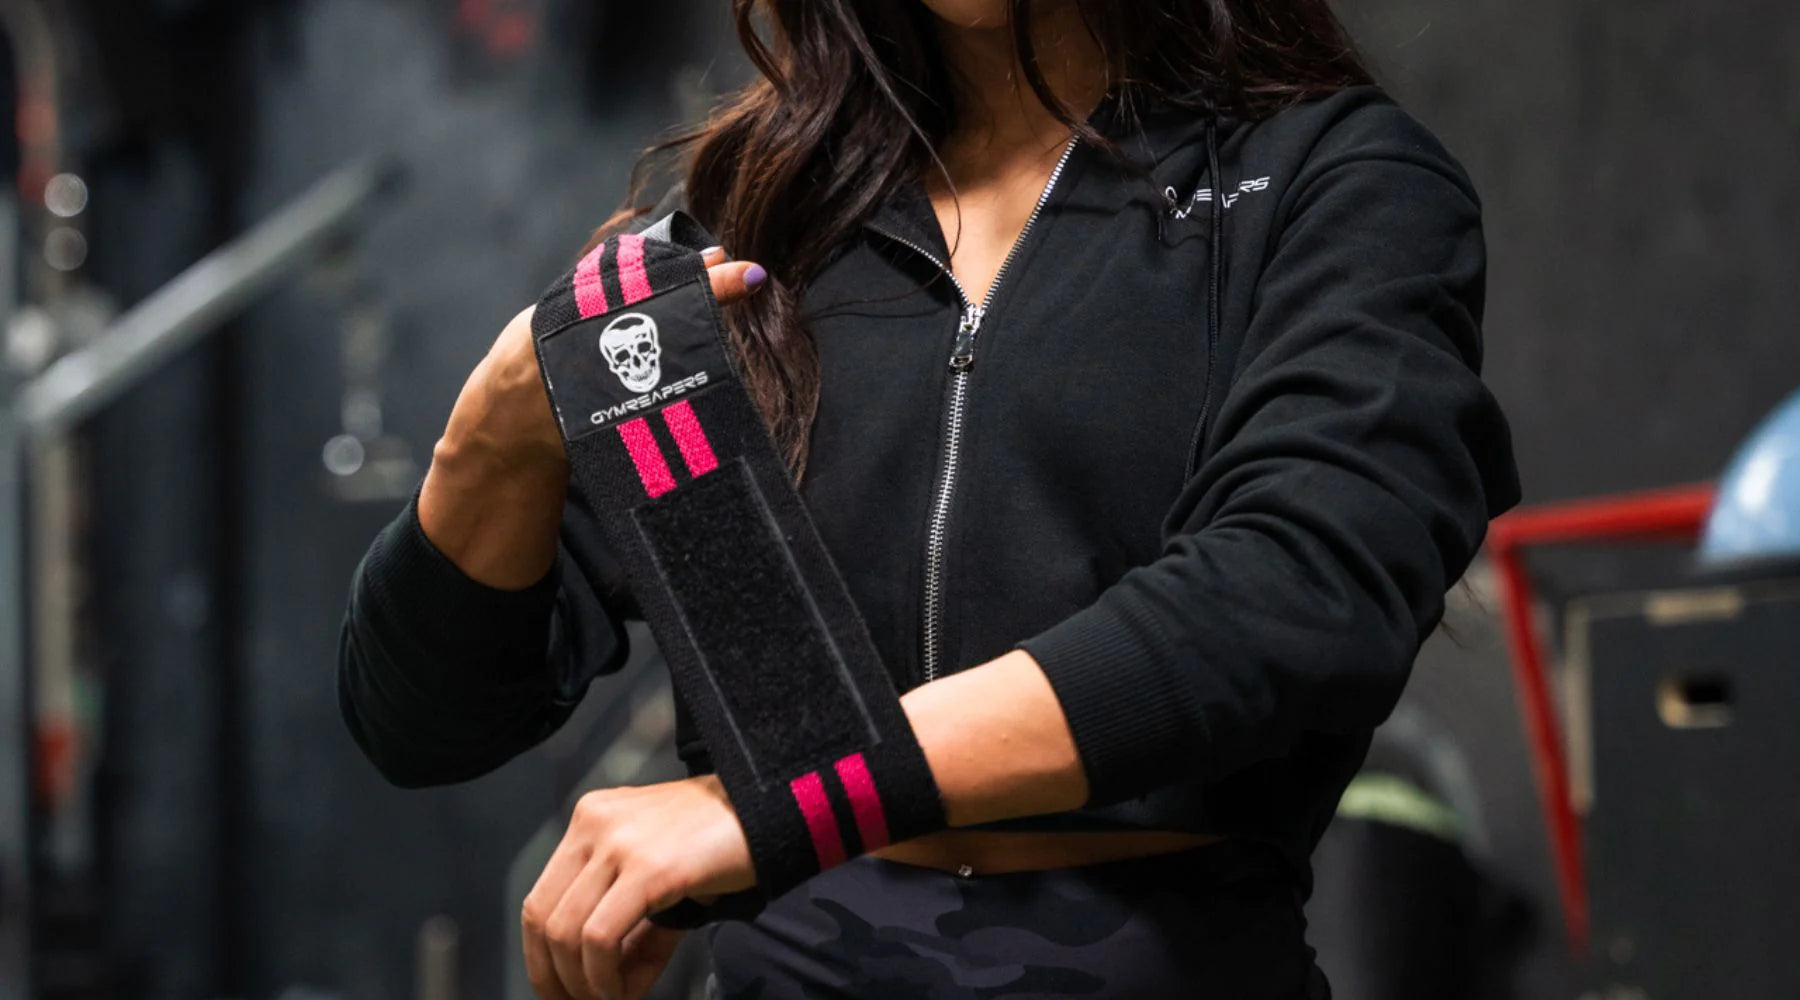 how to put on wrist wraps the proper way